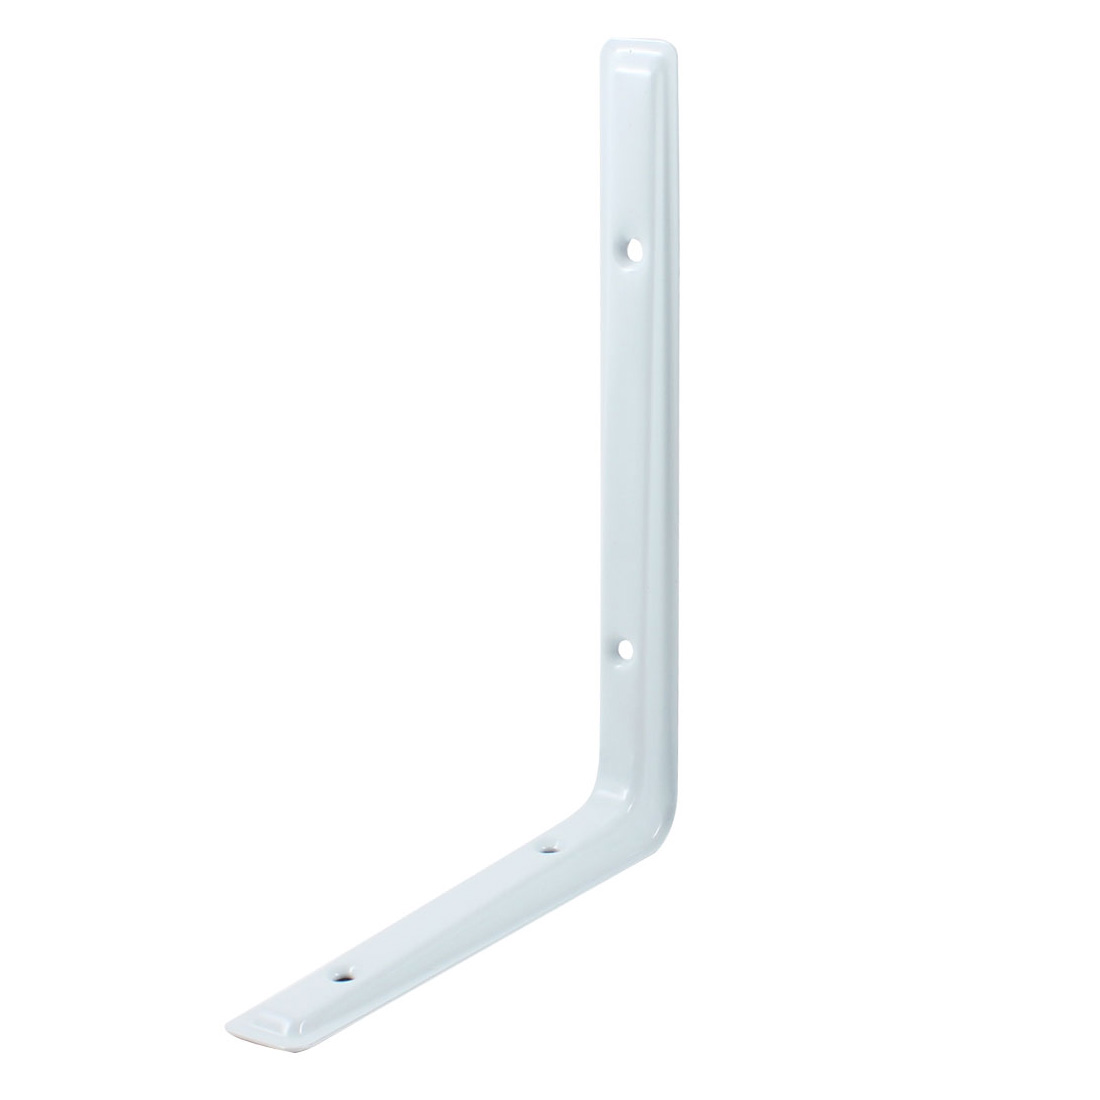 Uxcell 6" x 8" Metal Right Angle Bracket Shelf Off White Replacement, 2 Pack - image 4 of 4